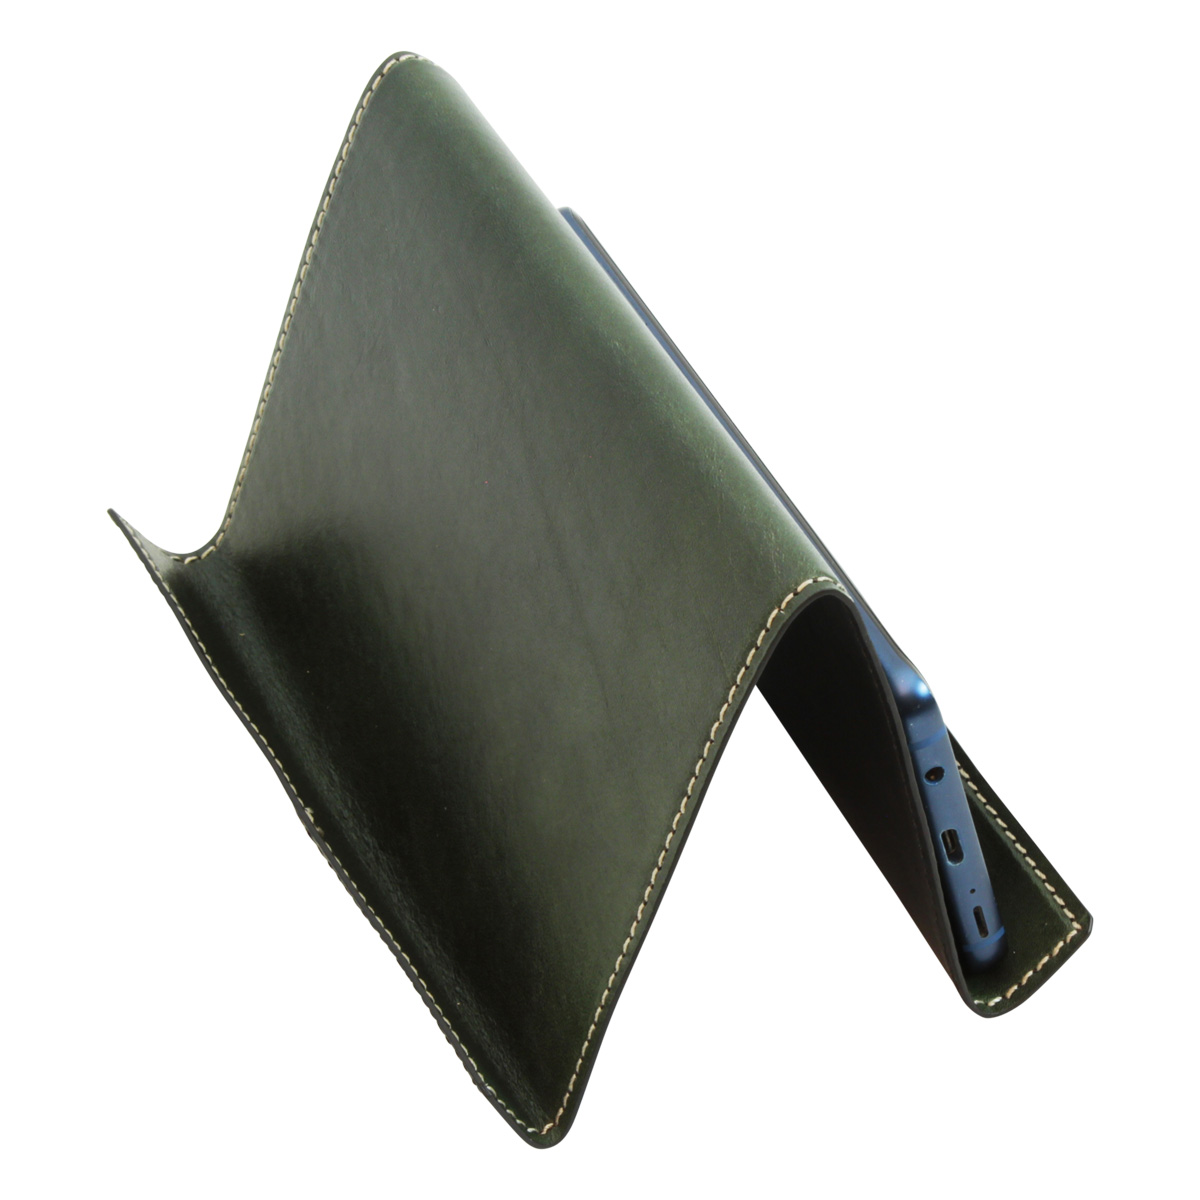 Leather ipad and iphone stand - green | 764089VE UK | Old Angler Firenze